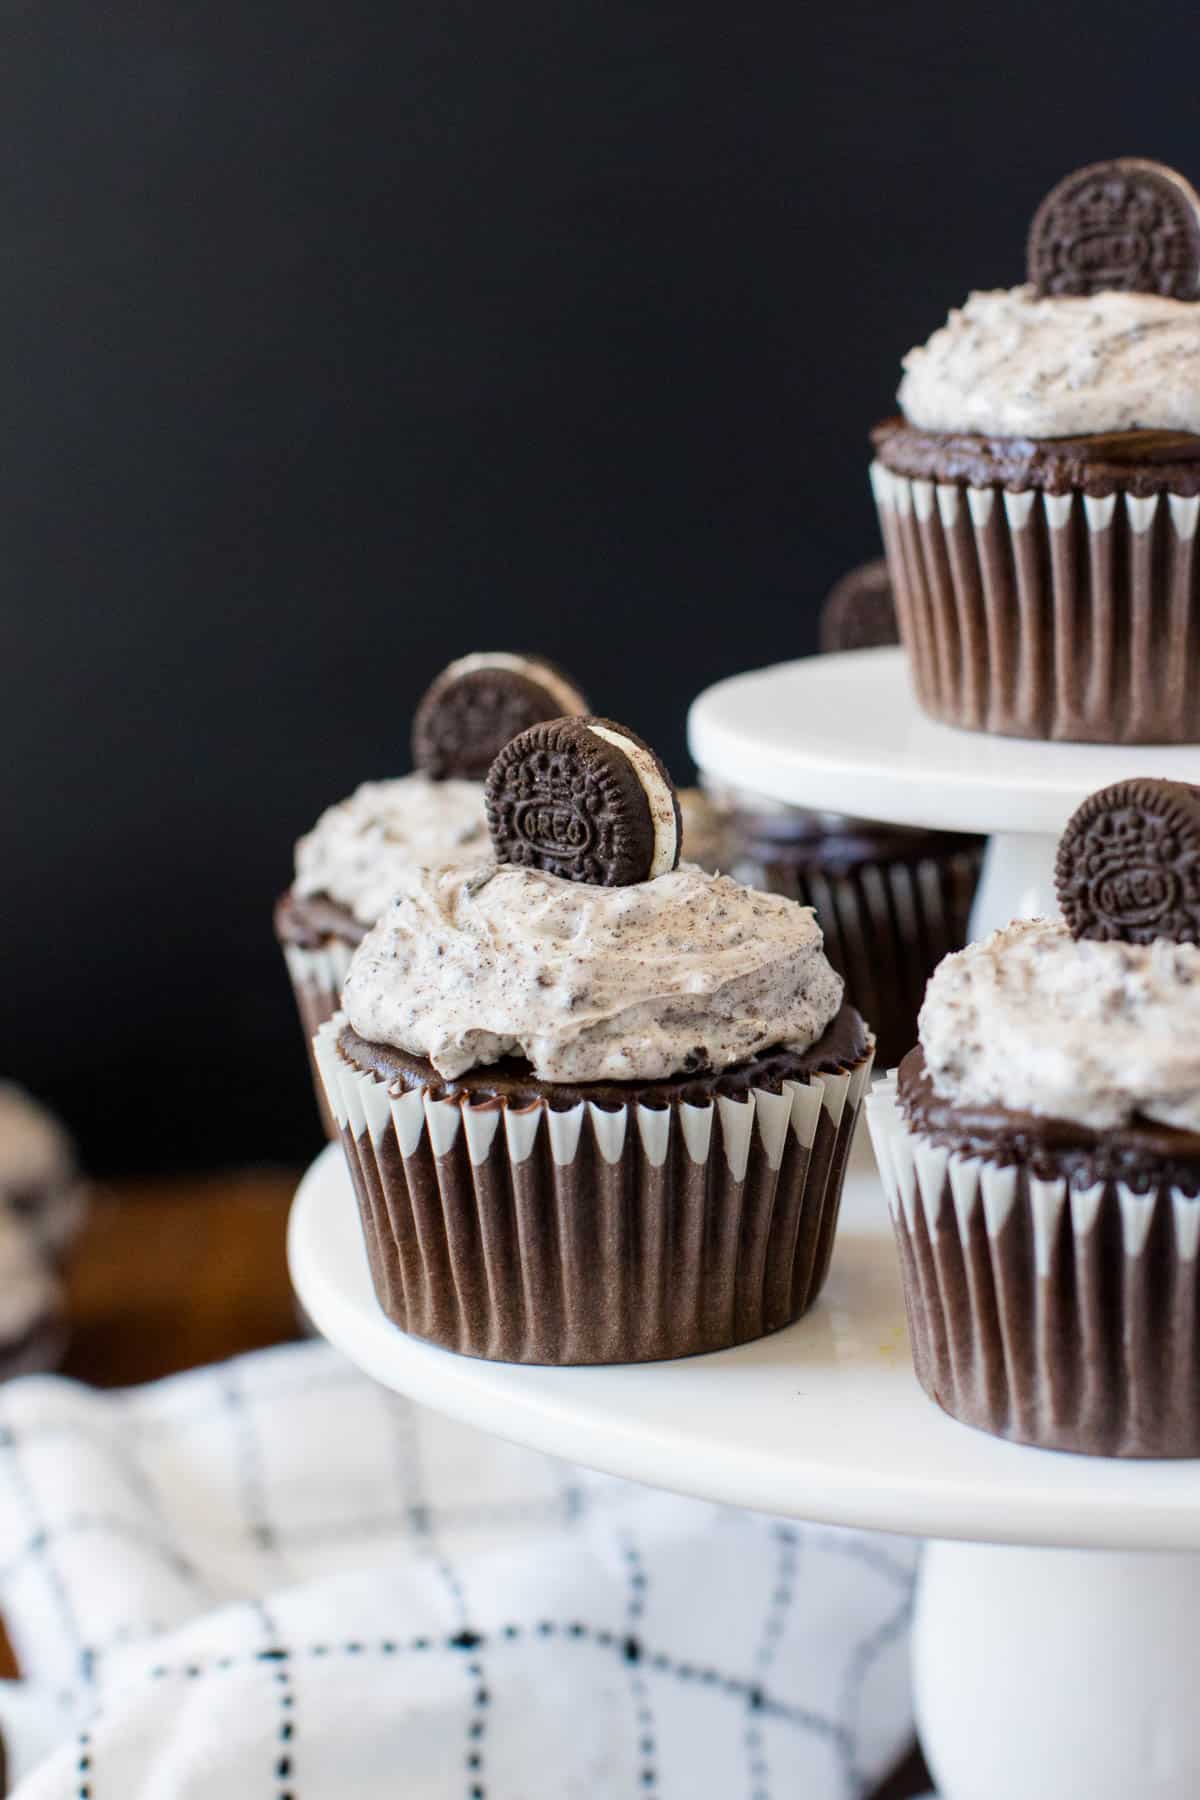 Oreo Cupcakes - Chocolate Cupcakes topped with a rich chocolate ganache and cream cheese & Oreo frosting.